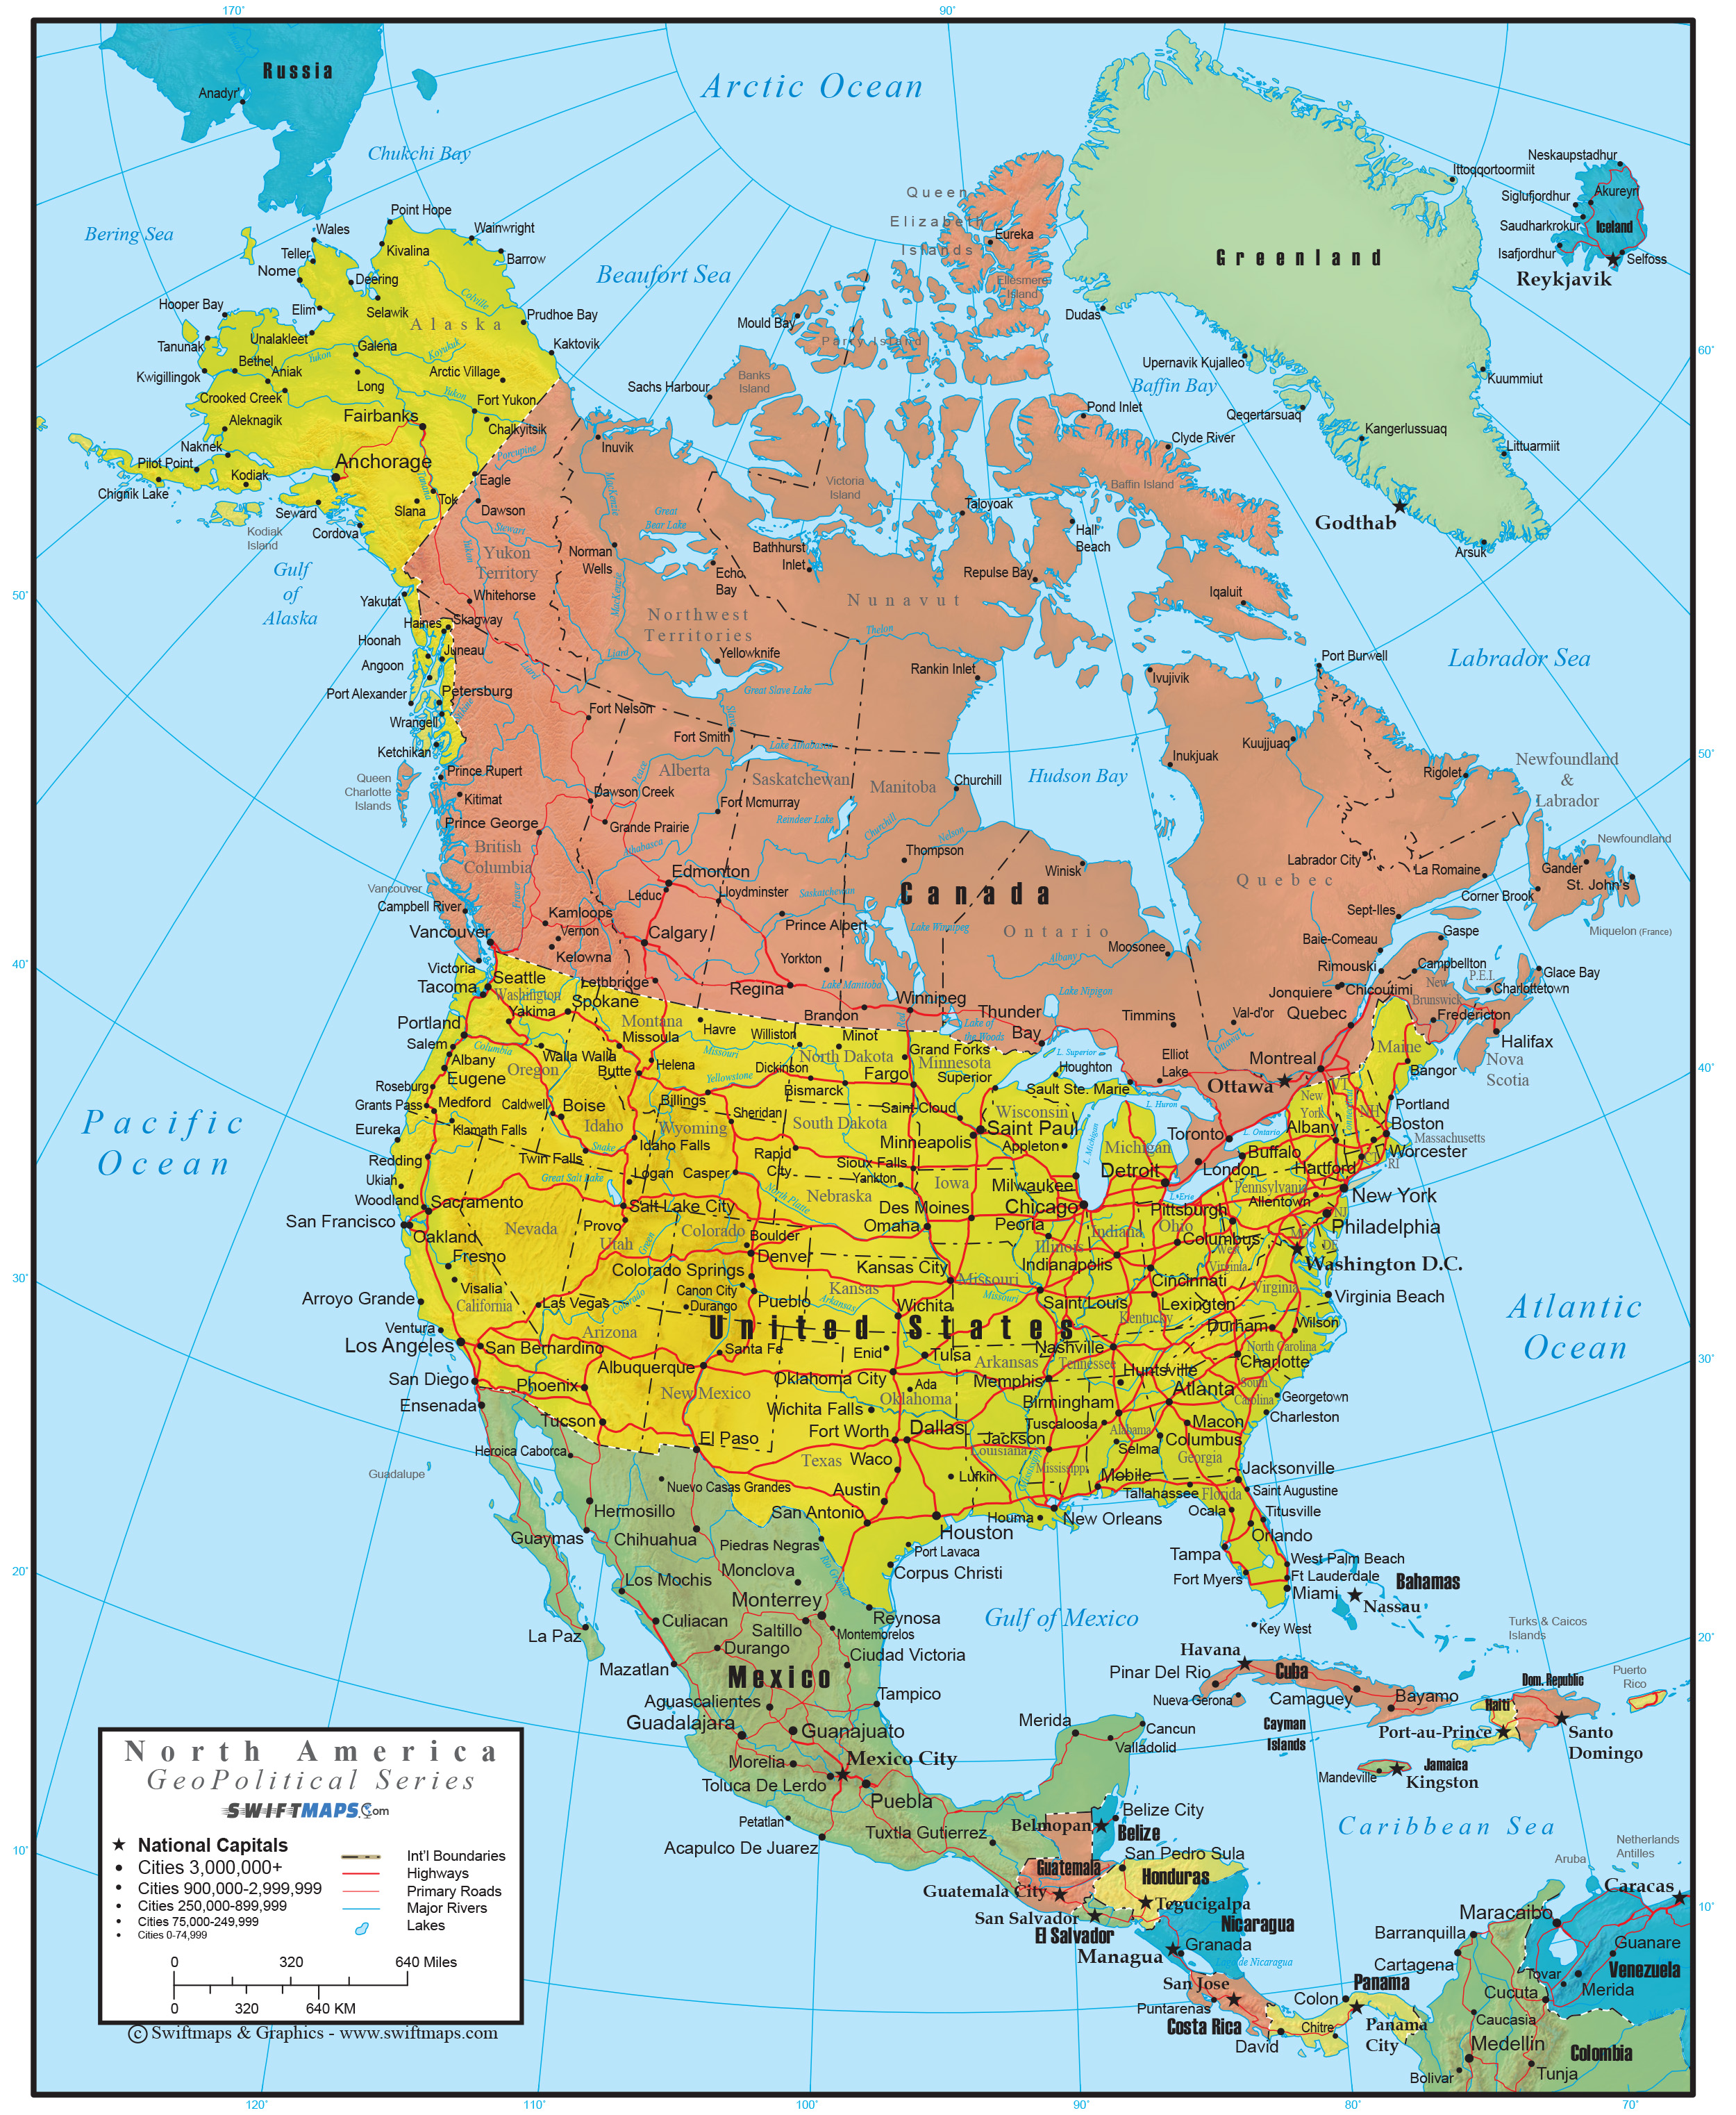 North America Wall Map GeoPolitical Deluxe Edition